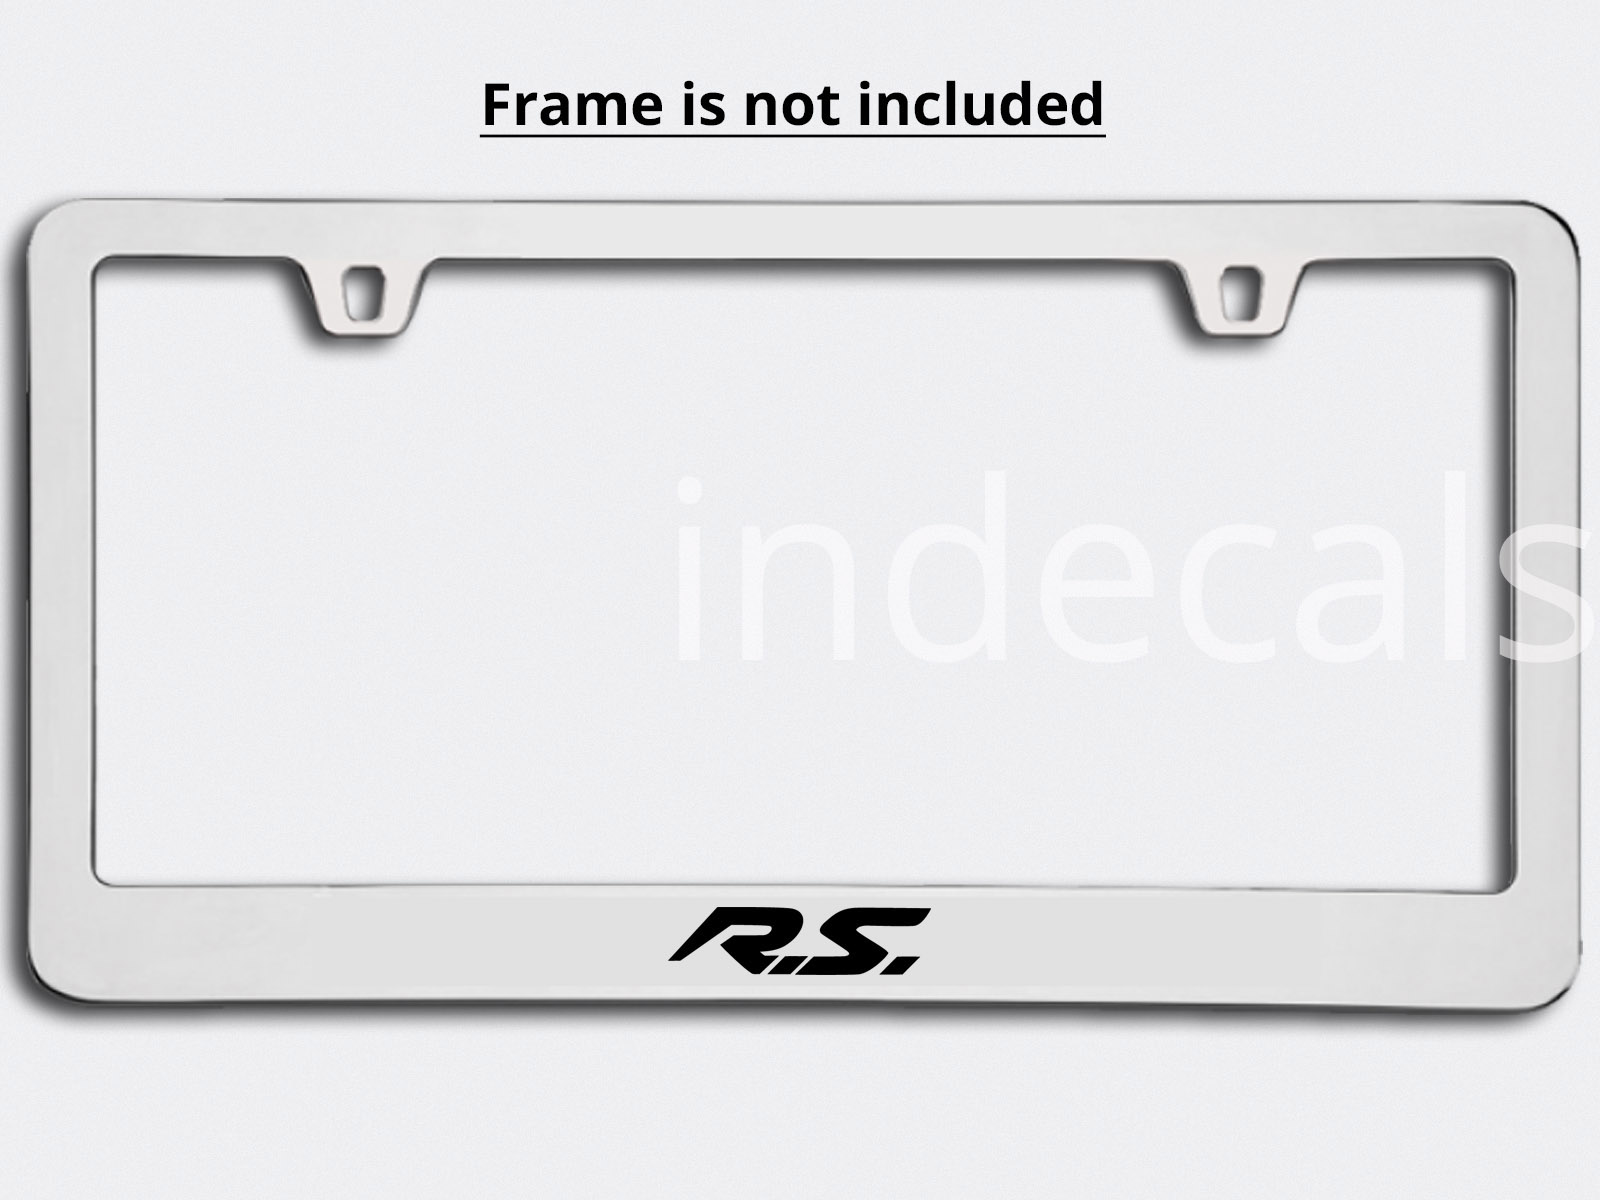 3 x Renault RS Stickers for License Plate Frame - Black